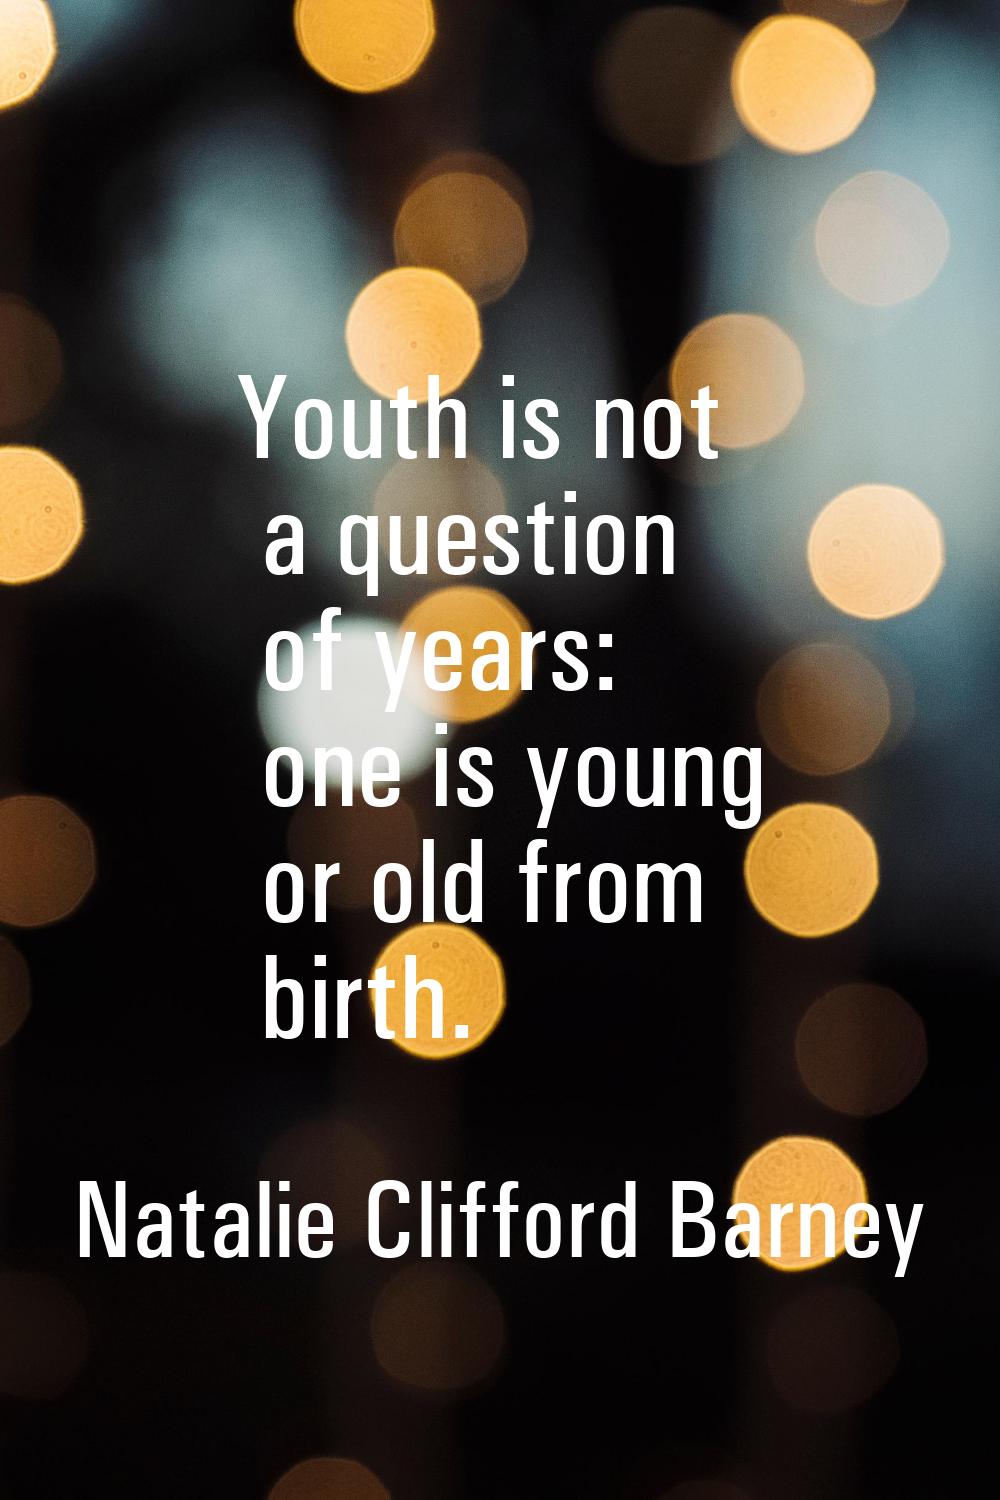 Youth is not a question of years: one is young or old from birth.